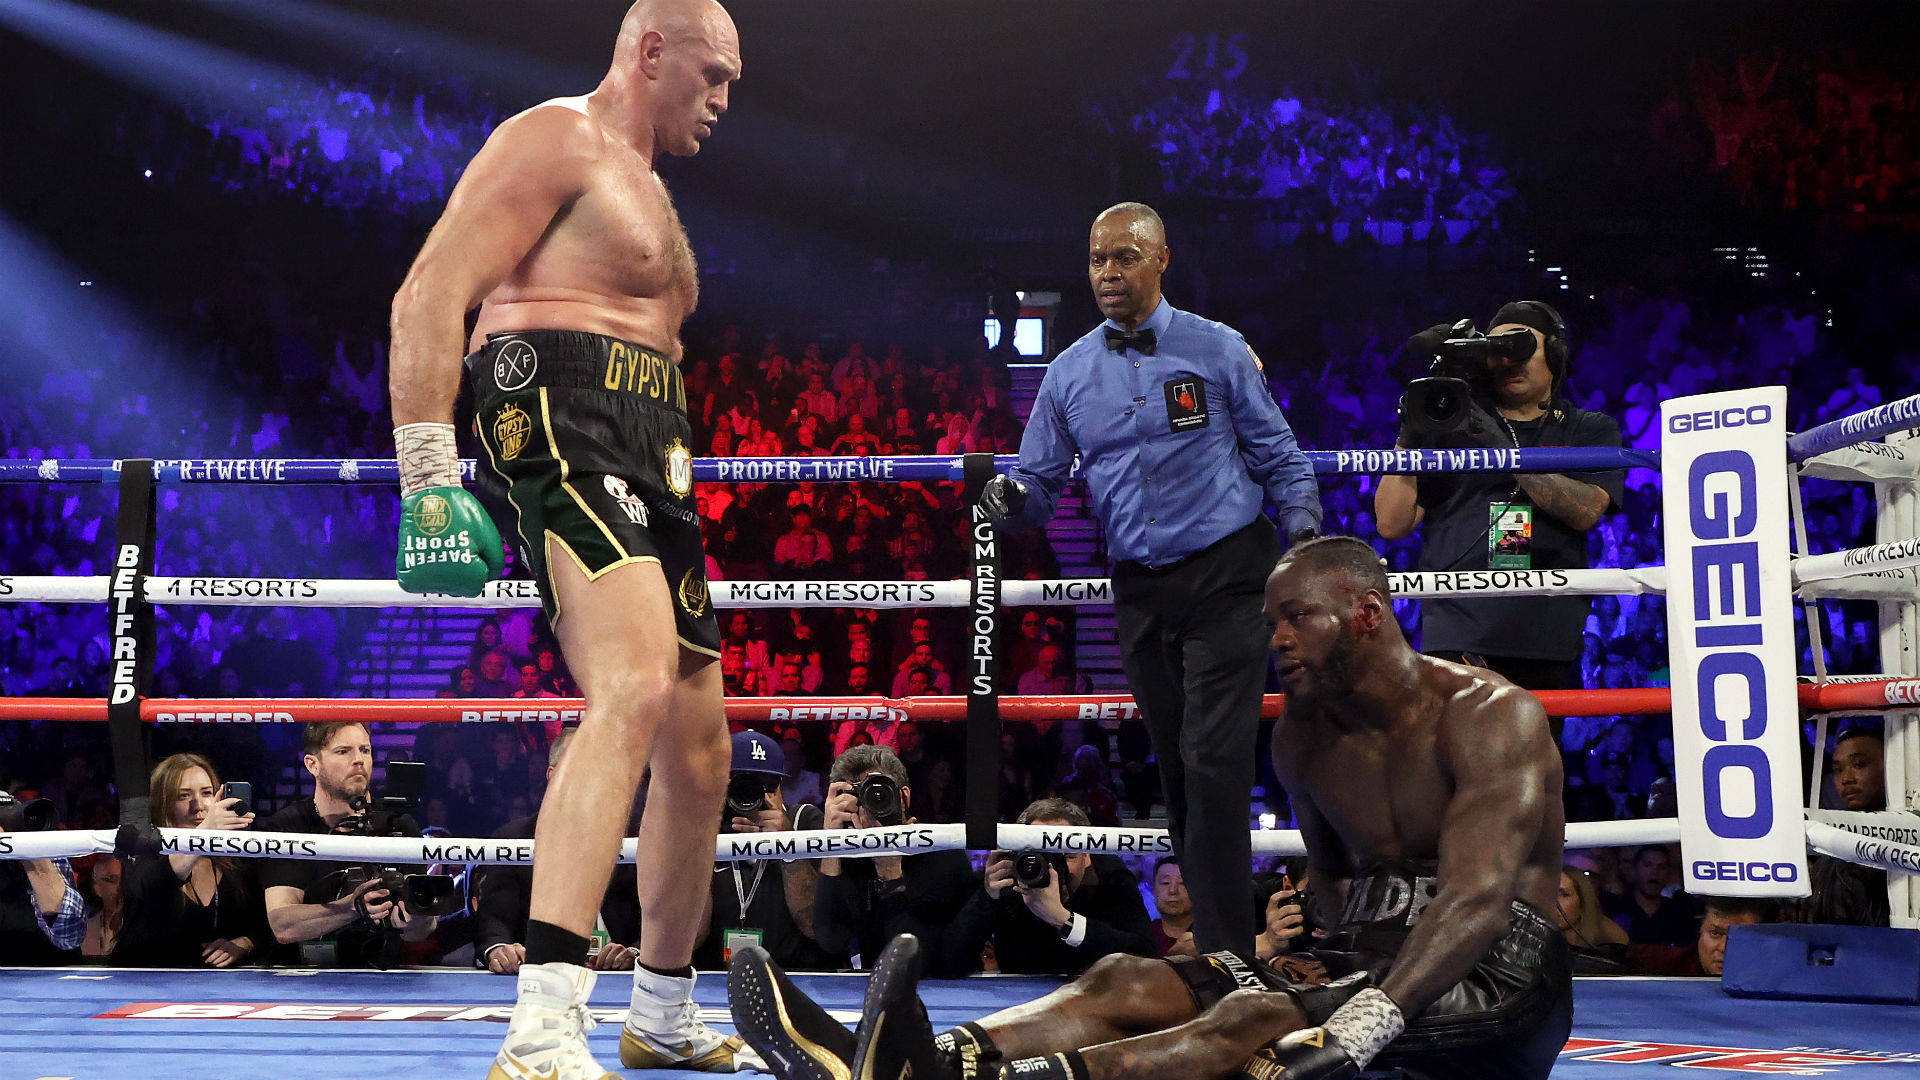 Tyson Fury Knocked Out His Opponent